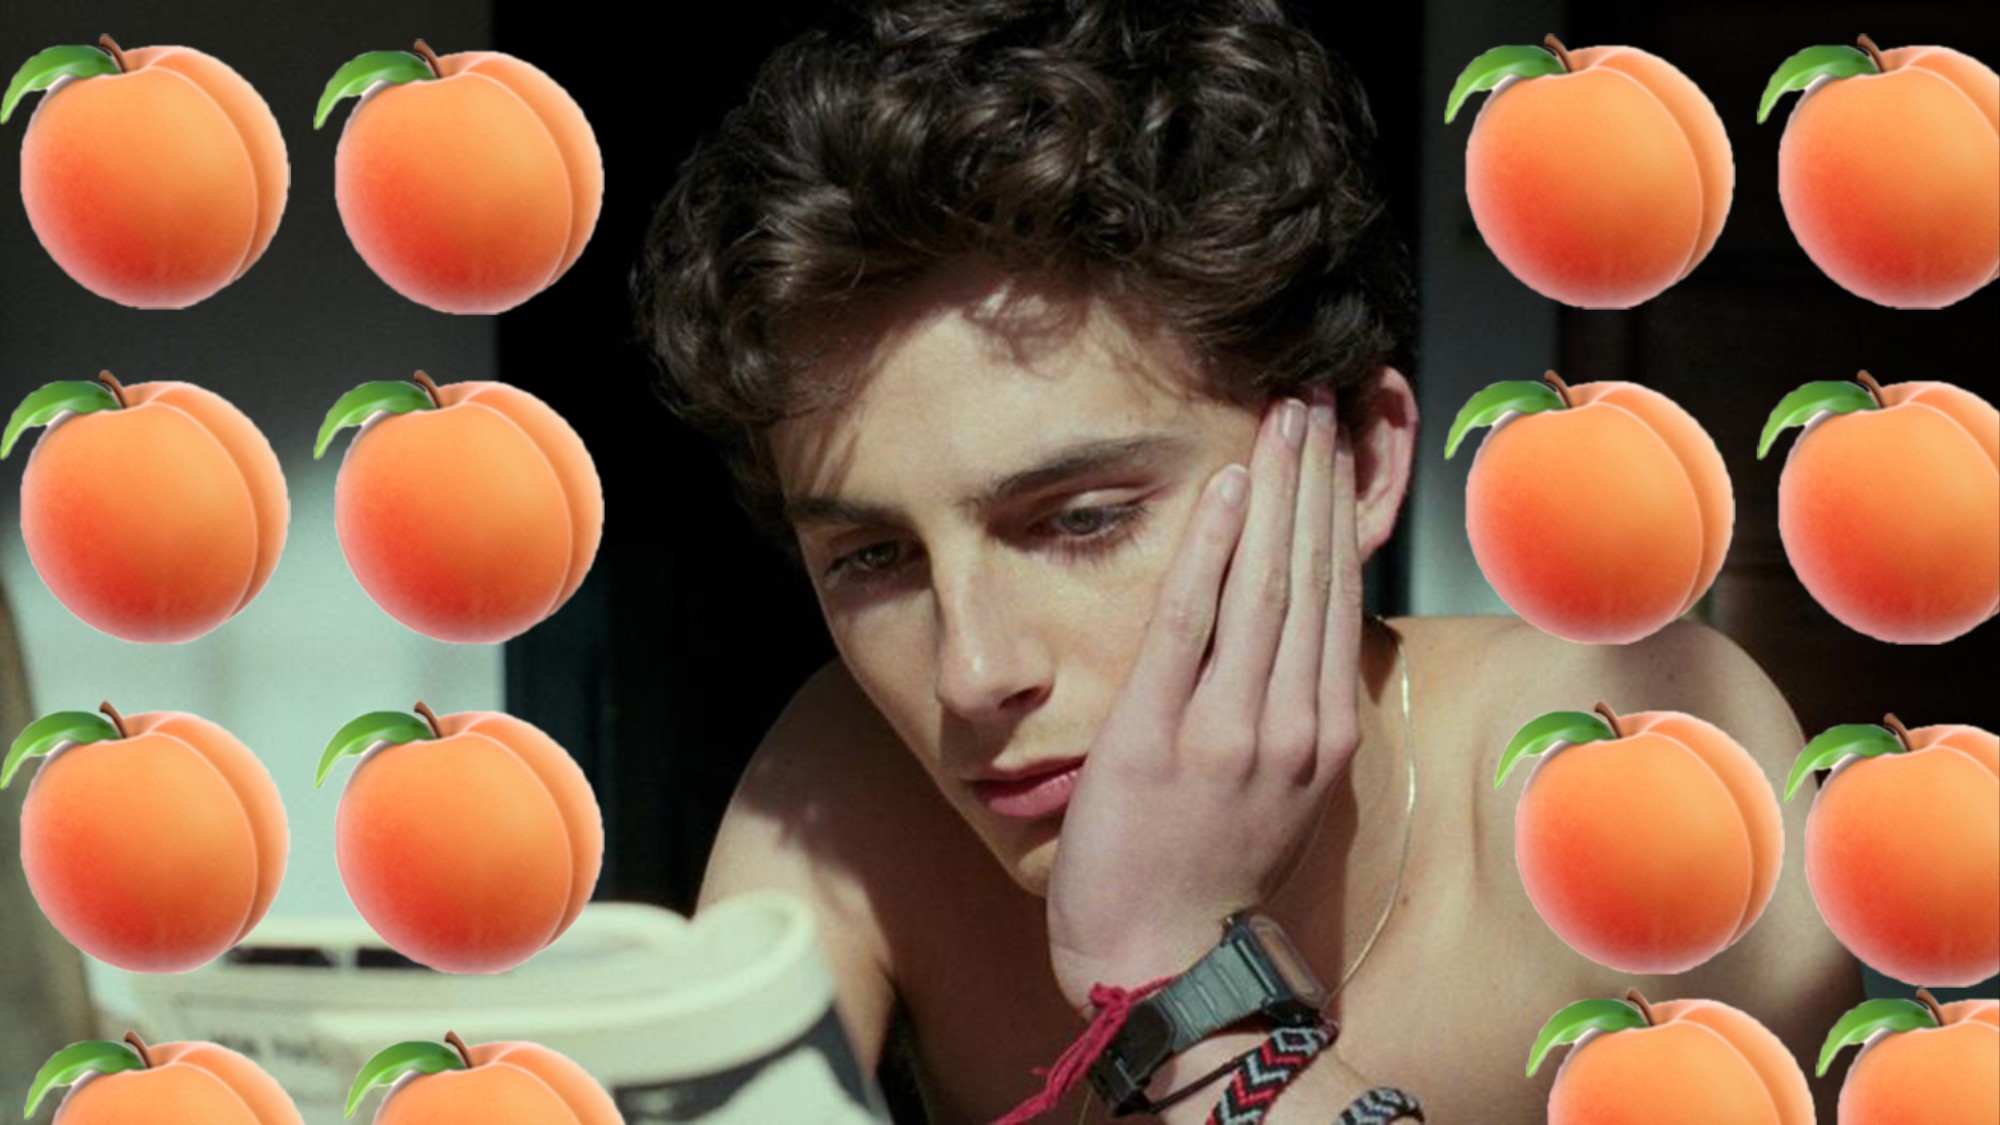 The most iconic part with fruit from call me by your name